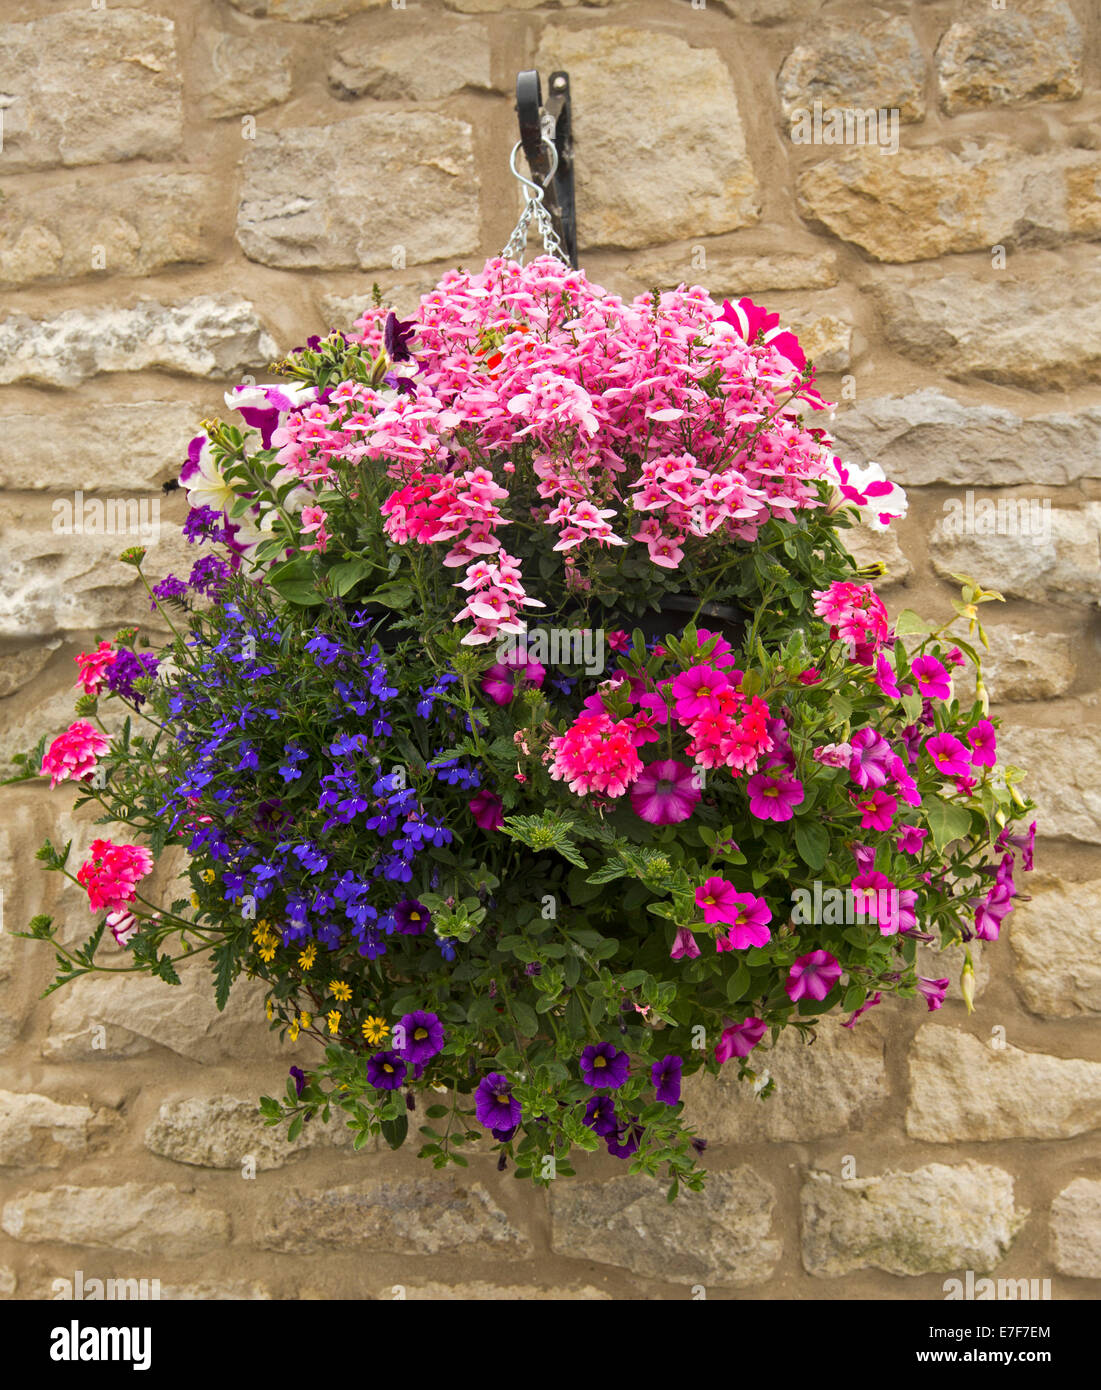 Hanging basket with spectacular mass of brightly coloured pink, red, blue flowers, lobelia, petunias, and dianthus, against light brown stone wall Stock Photo